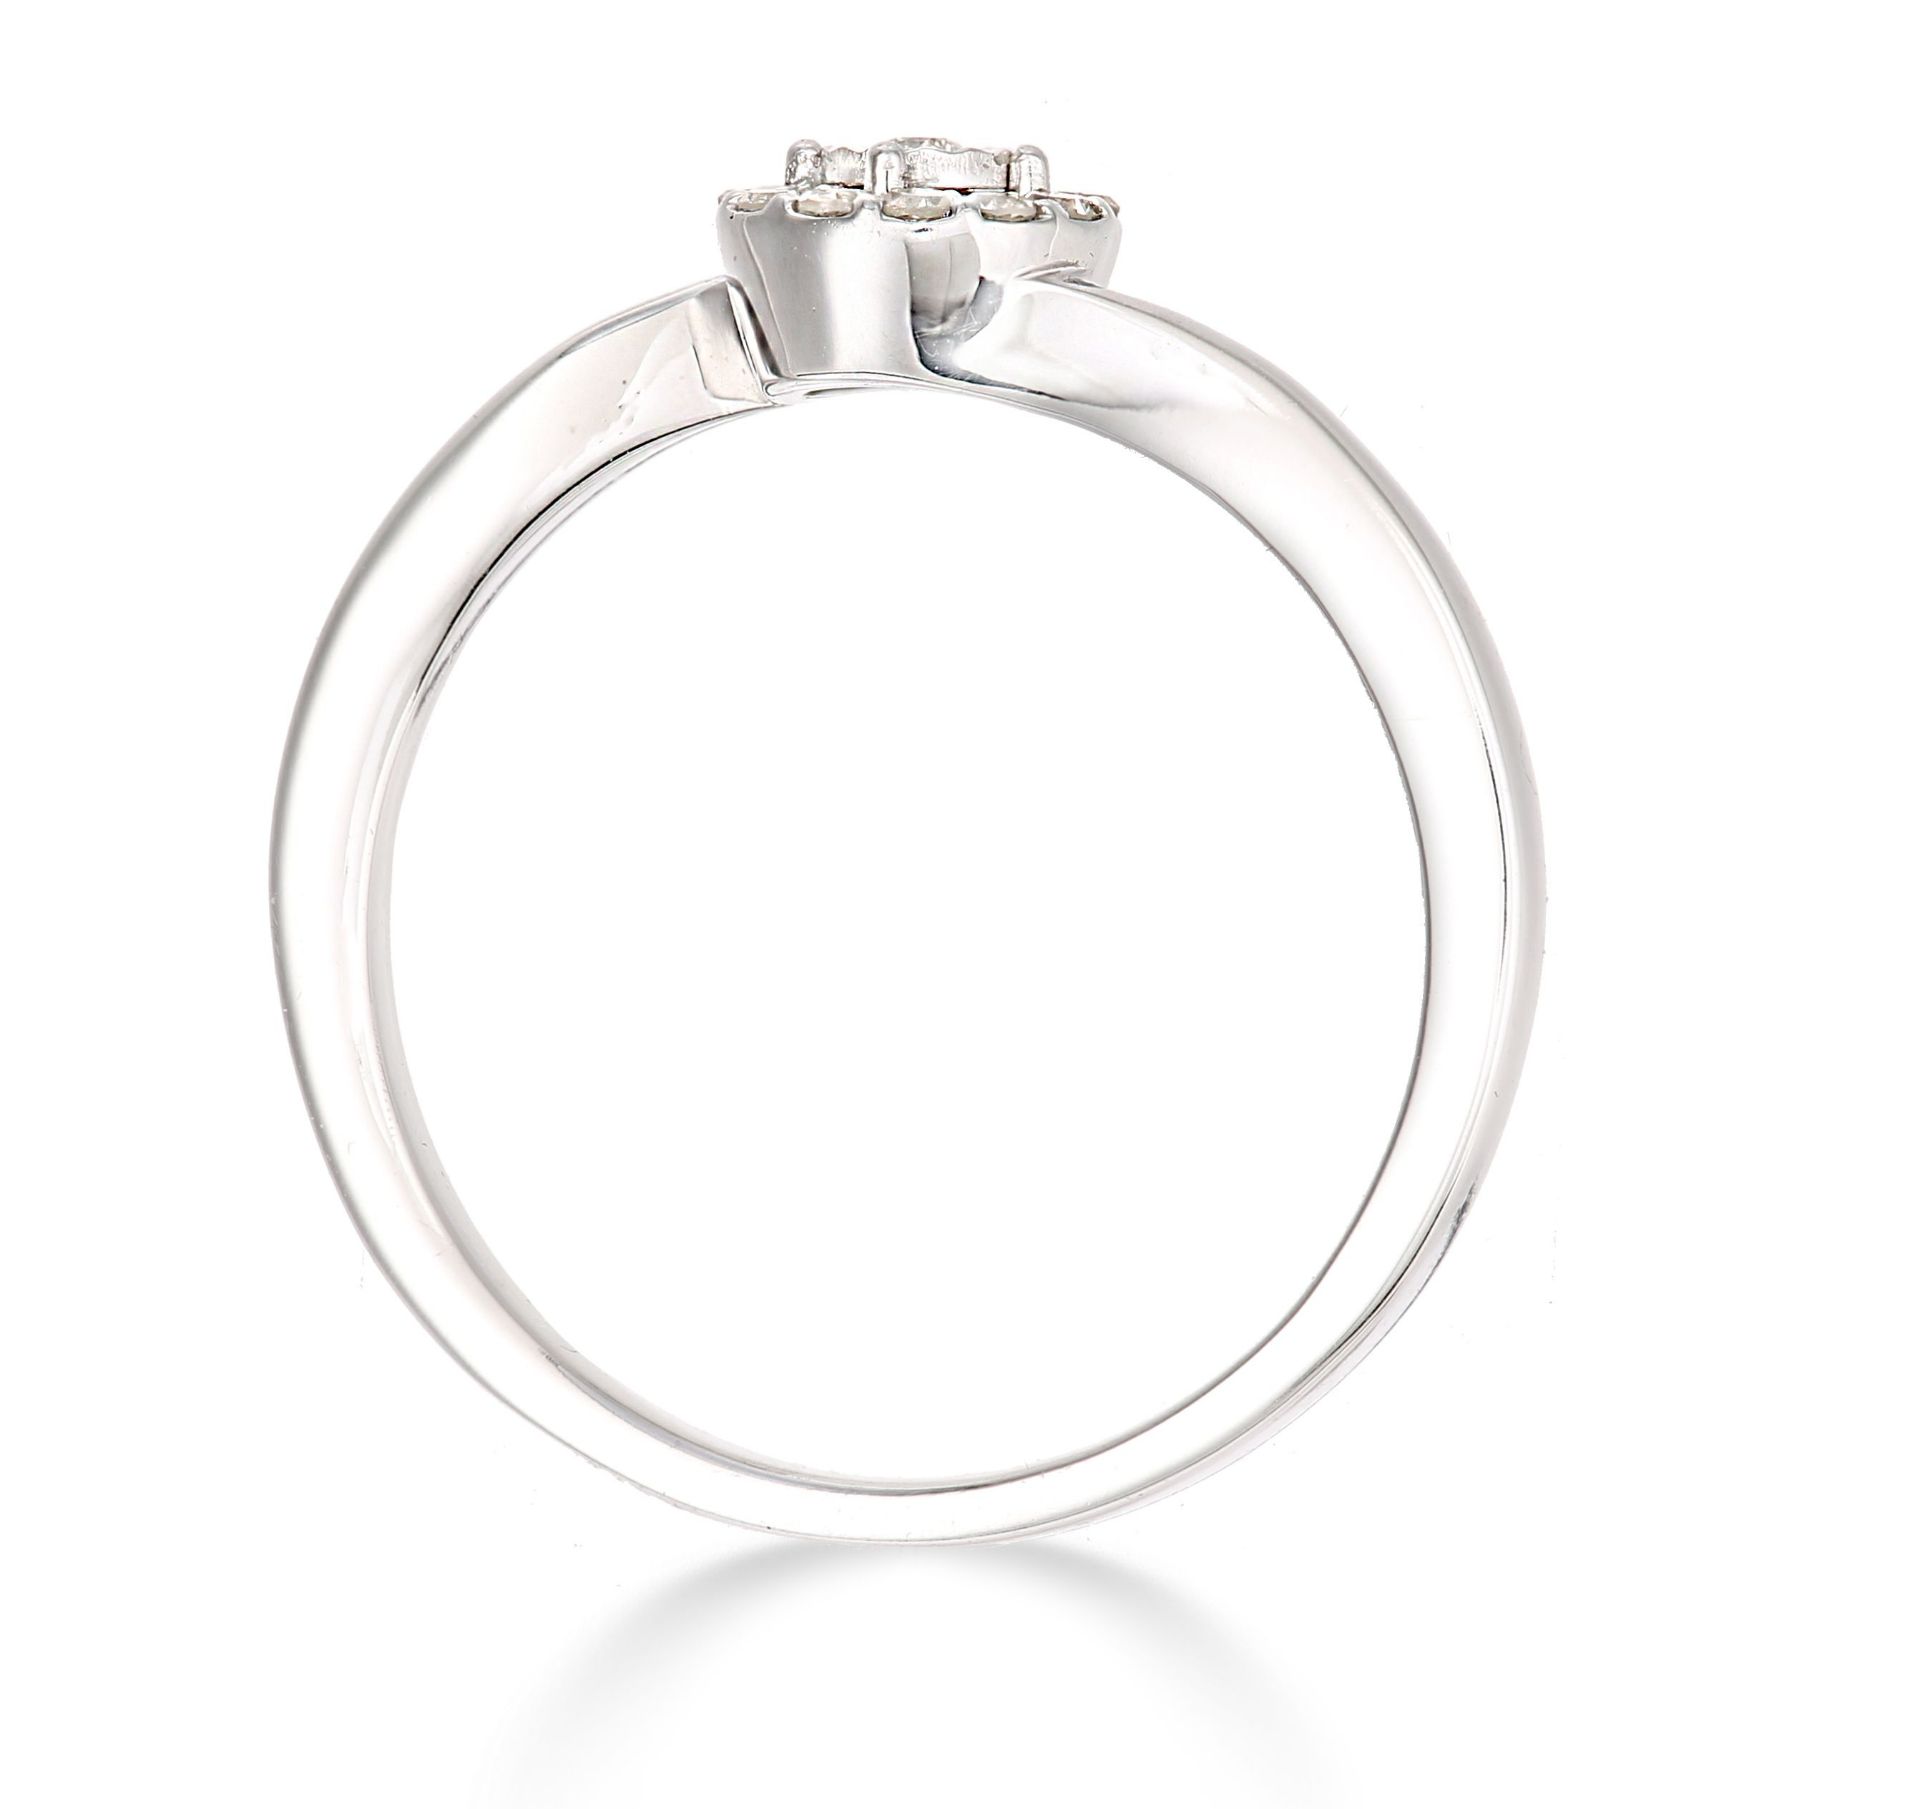 RRP £550 White Gold Diamond Ring with subtle twist Size M (UR4362B) - Image 3 of 3